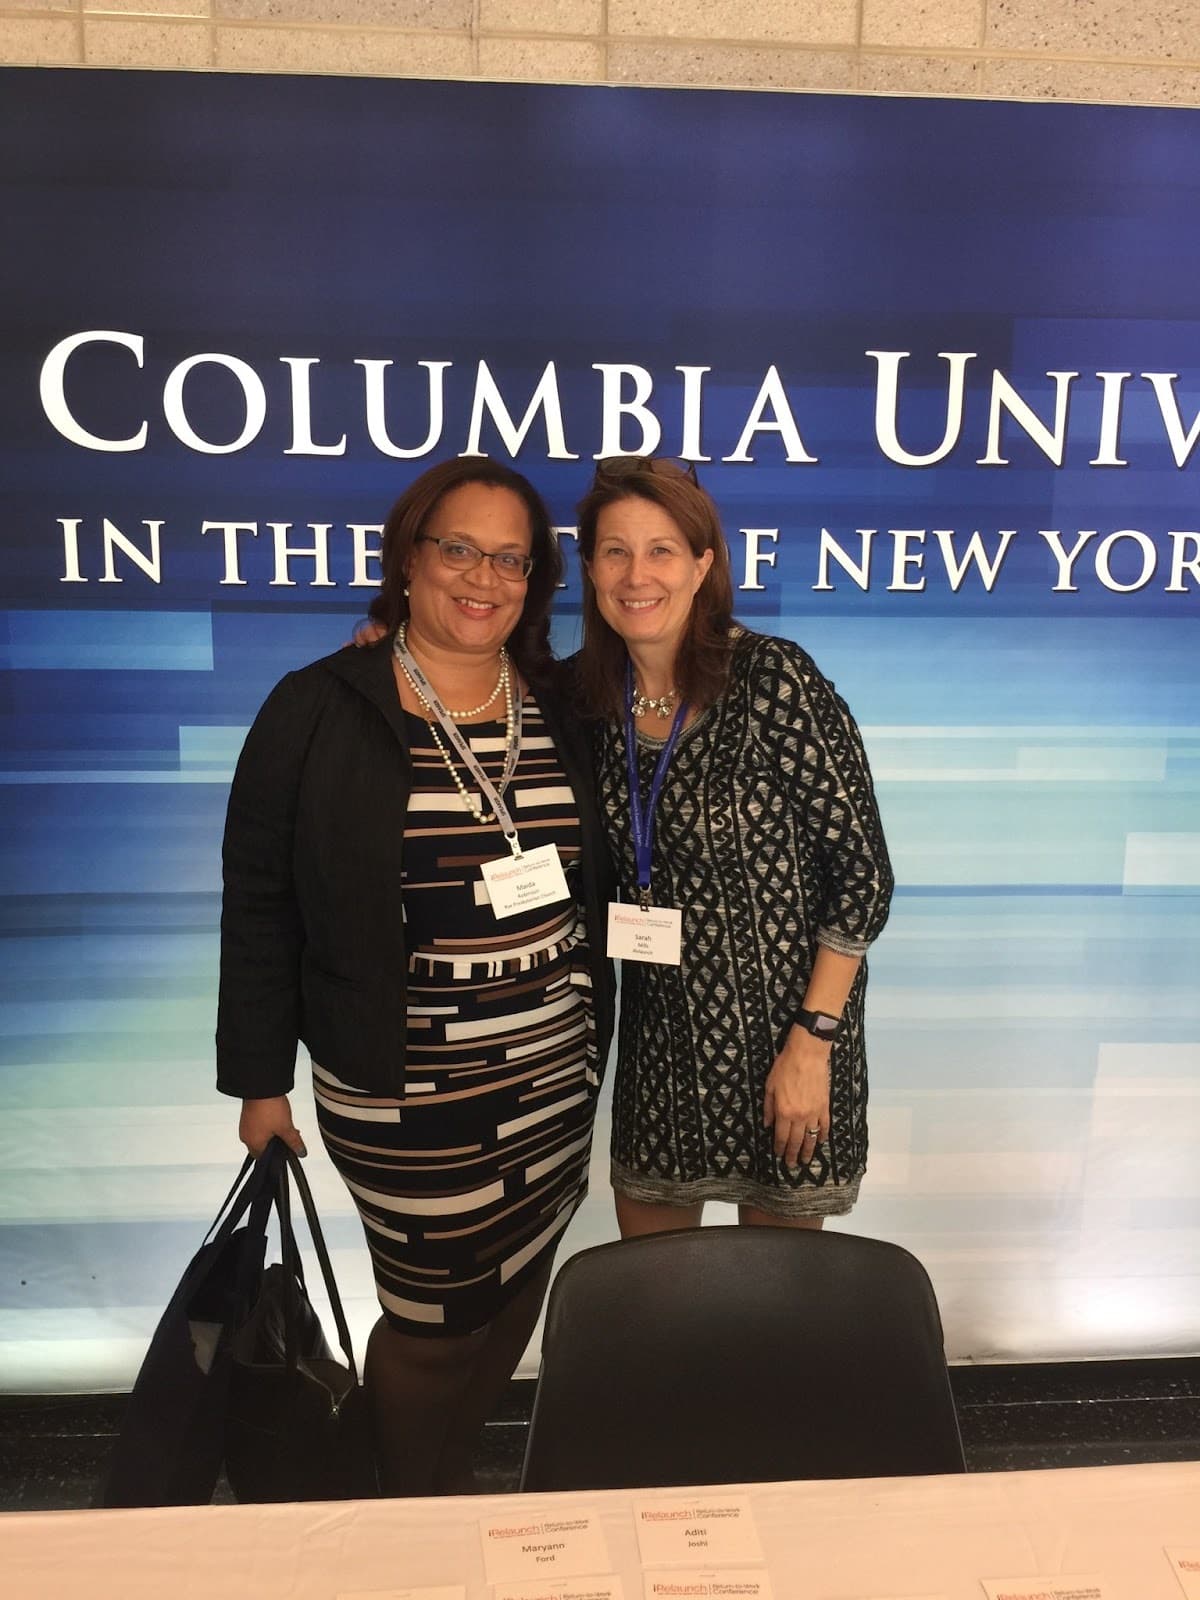 Maida Robinson at the 2017 iRelaunch Return to Work Conference at Columbia University in NYC with iRelaunch's Senior Director of Events, Sarah Mills